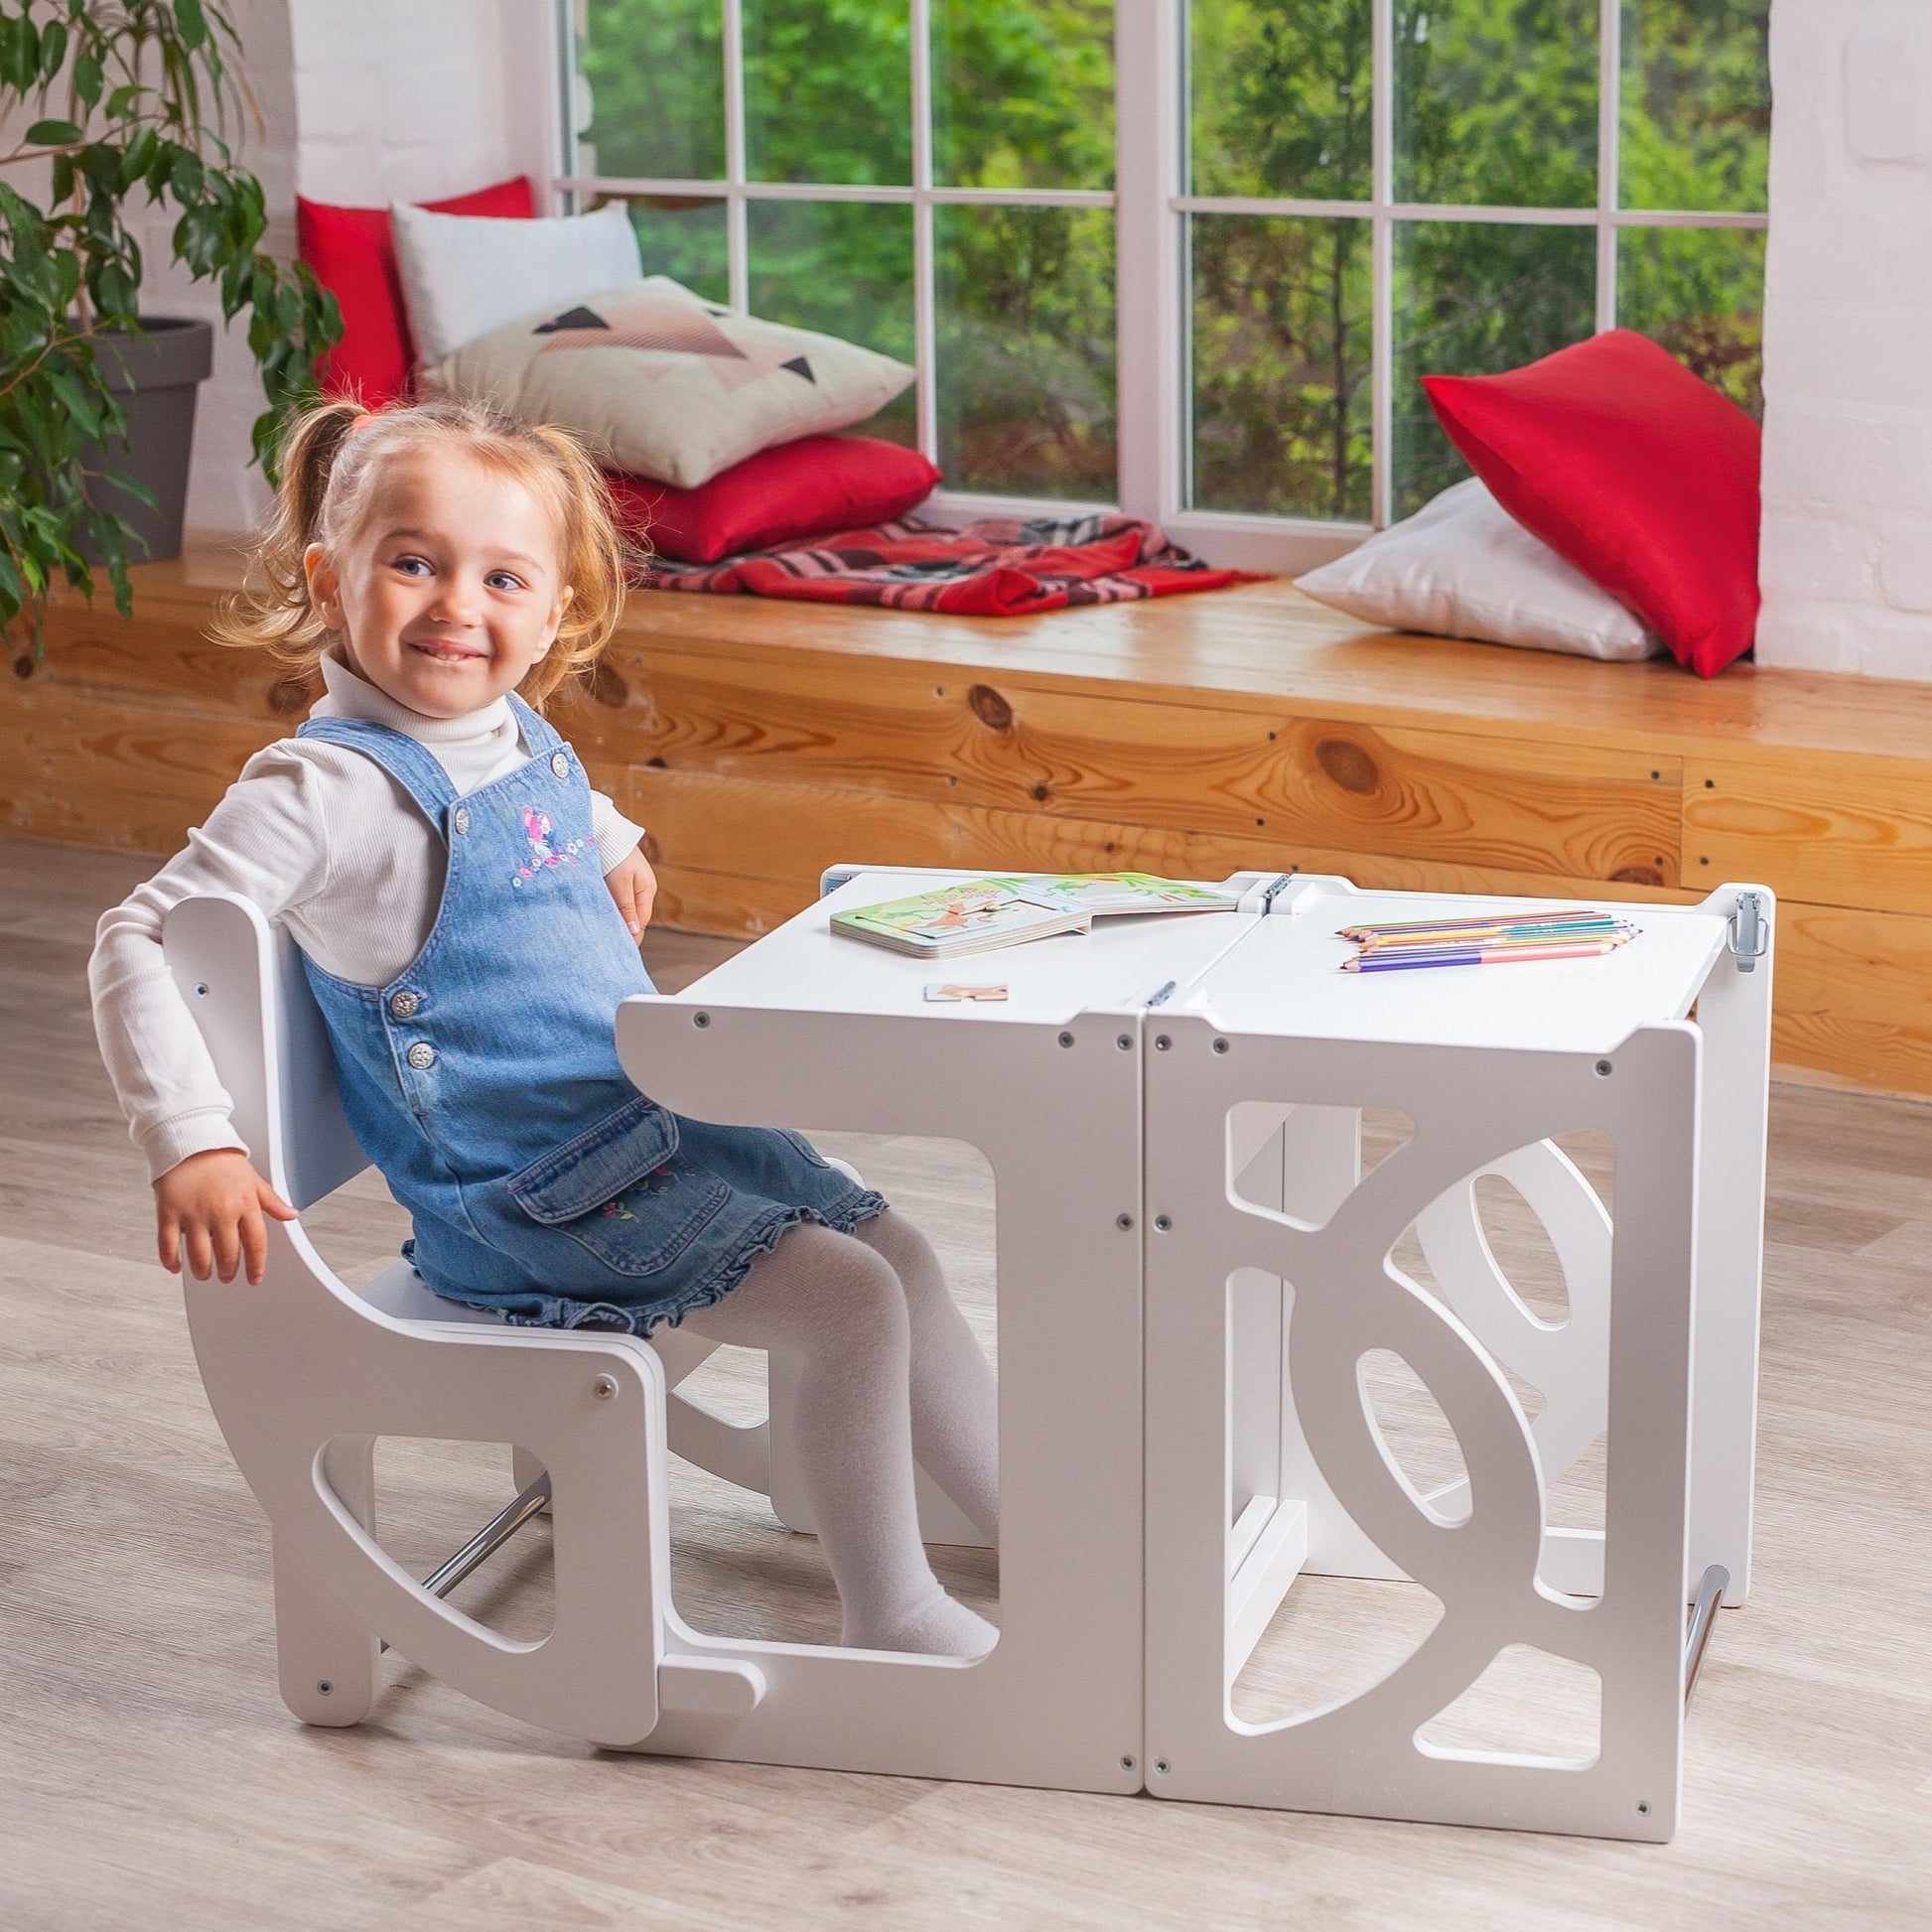 Convertible learning helper tower & table, montessori kitchen step stool